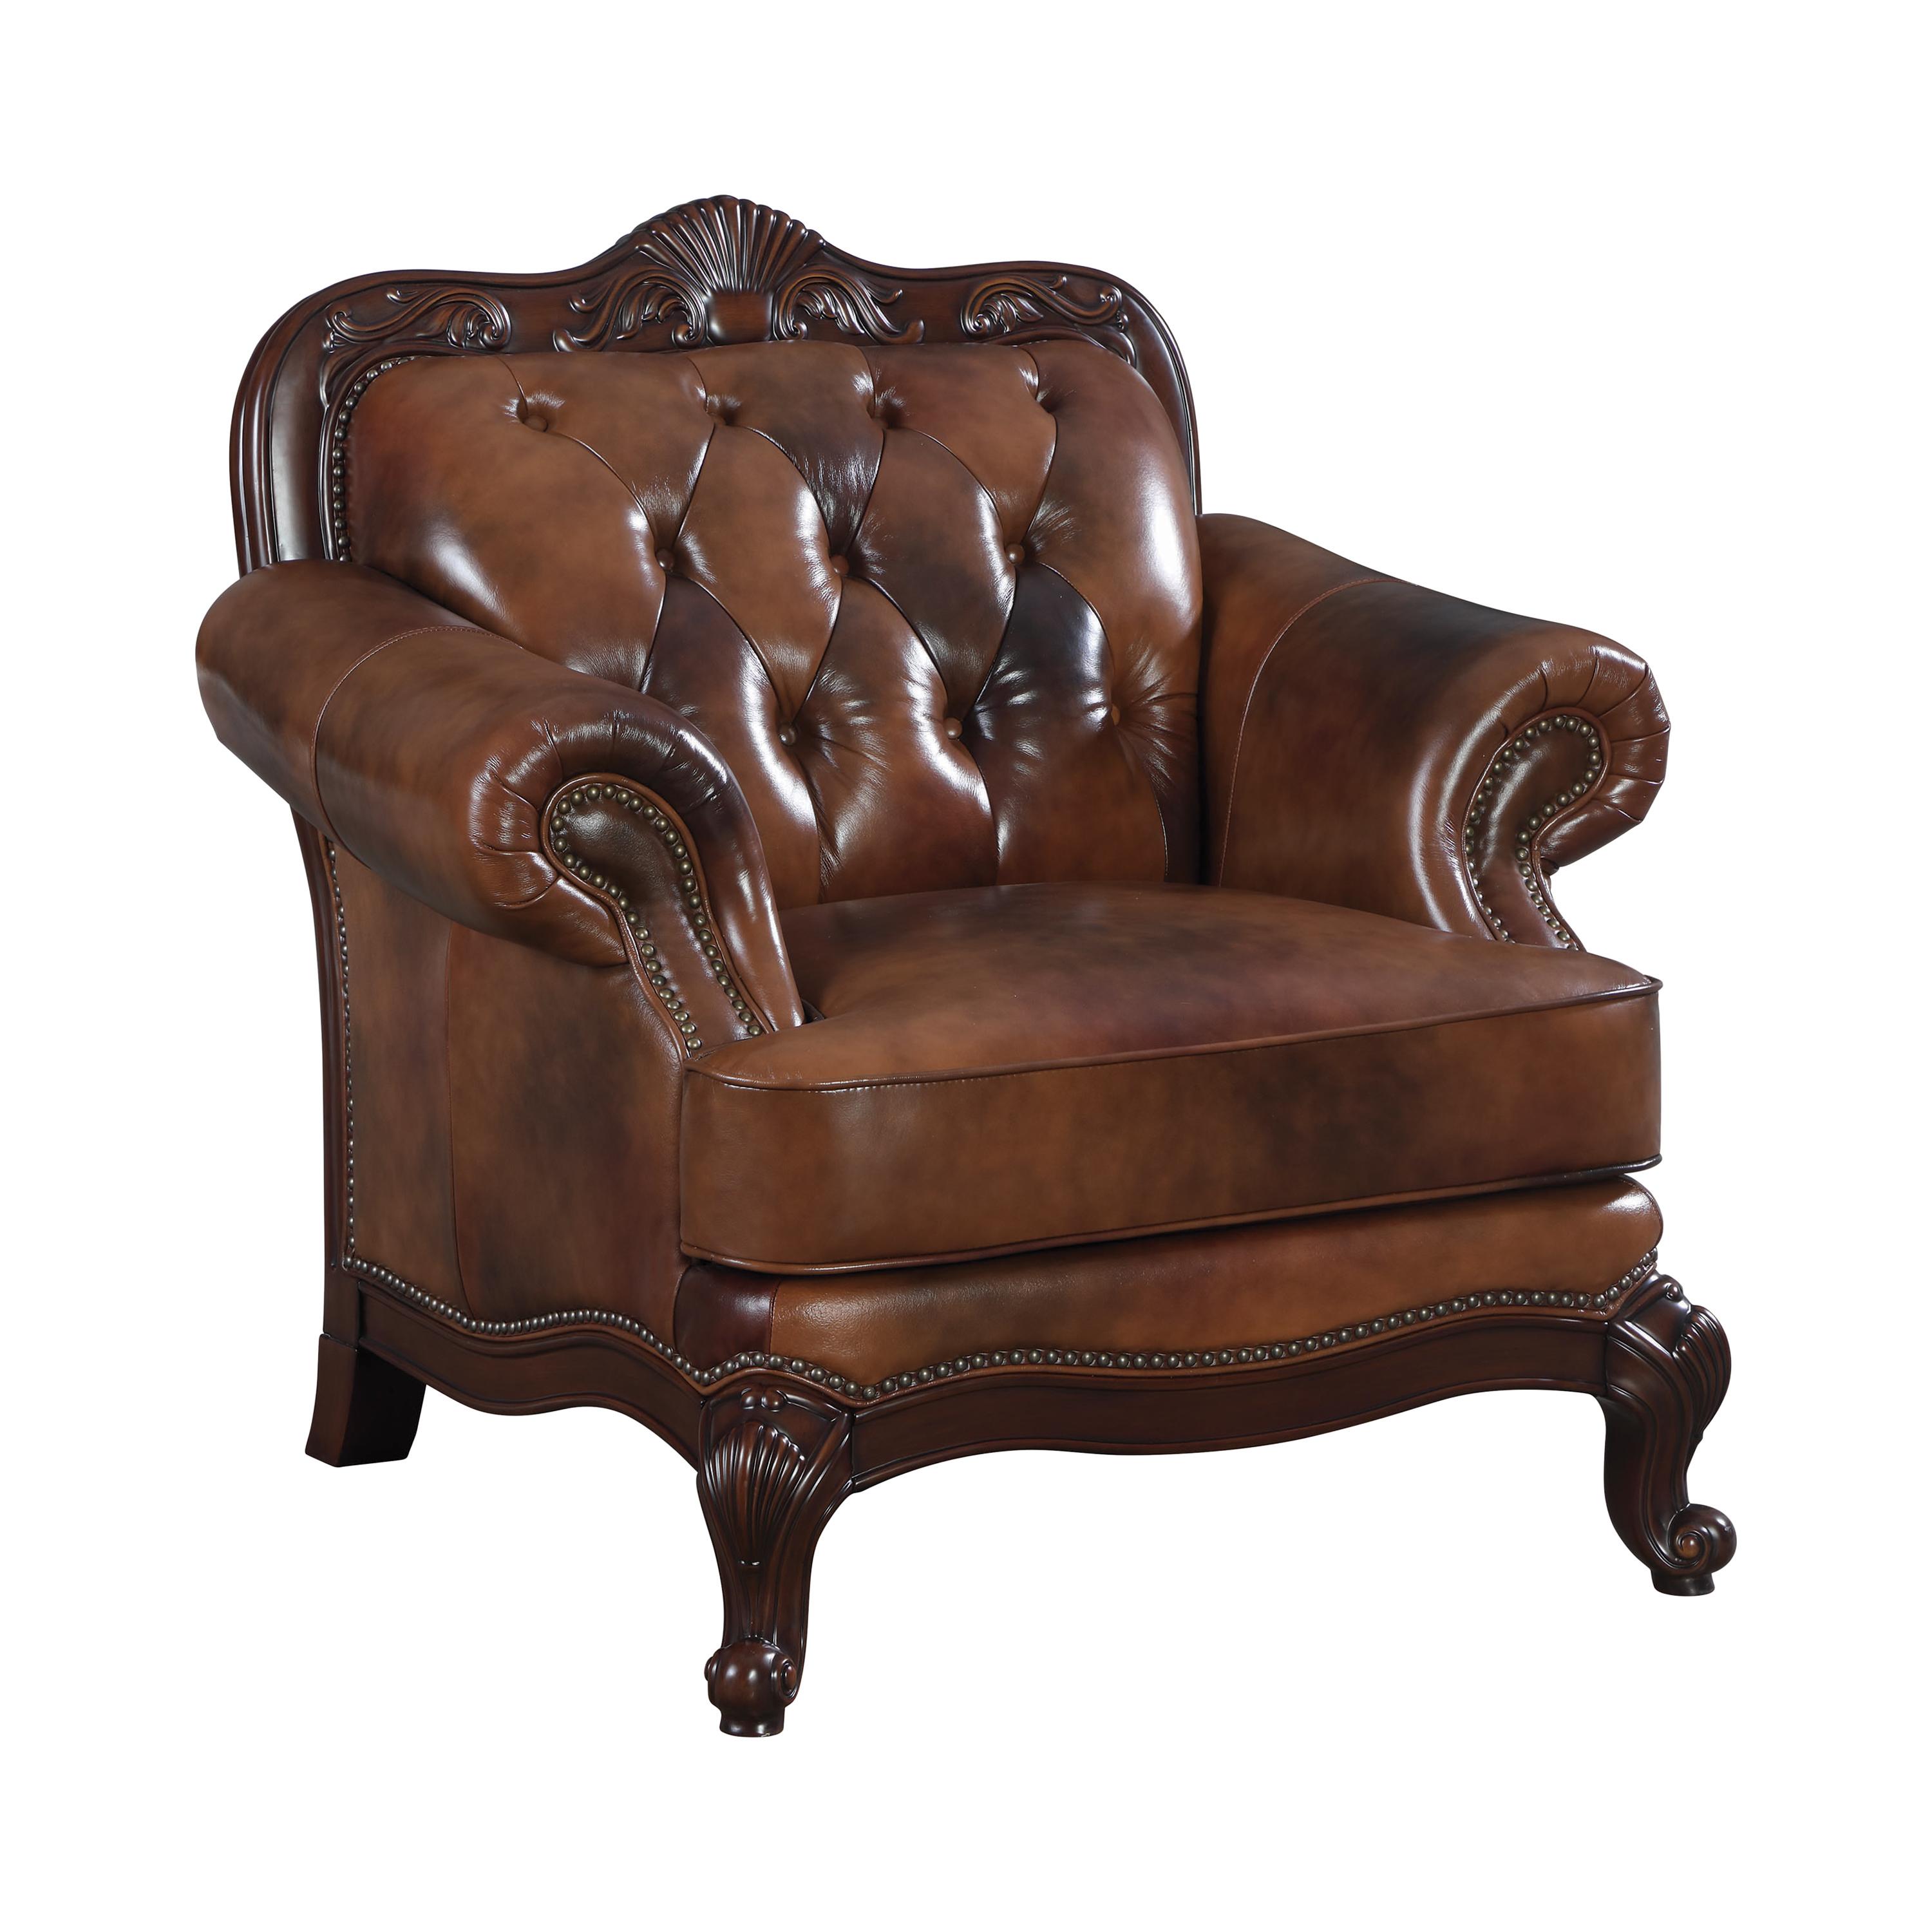 Classic Arm Chair 500683 Victoria 500683 in Brown Leather